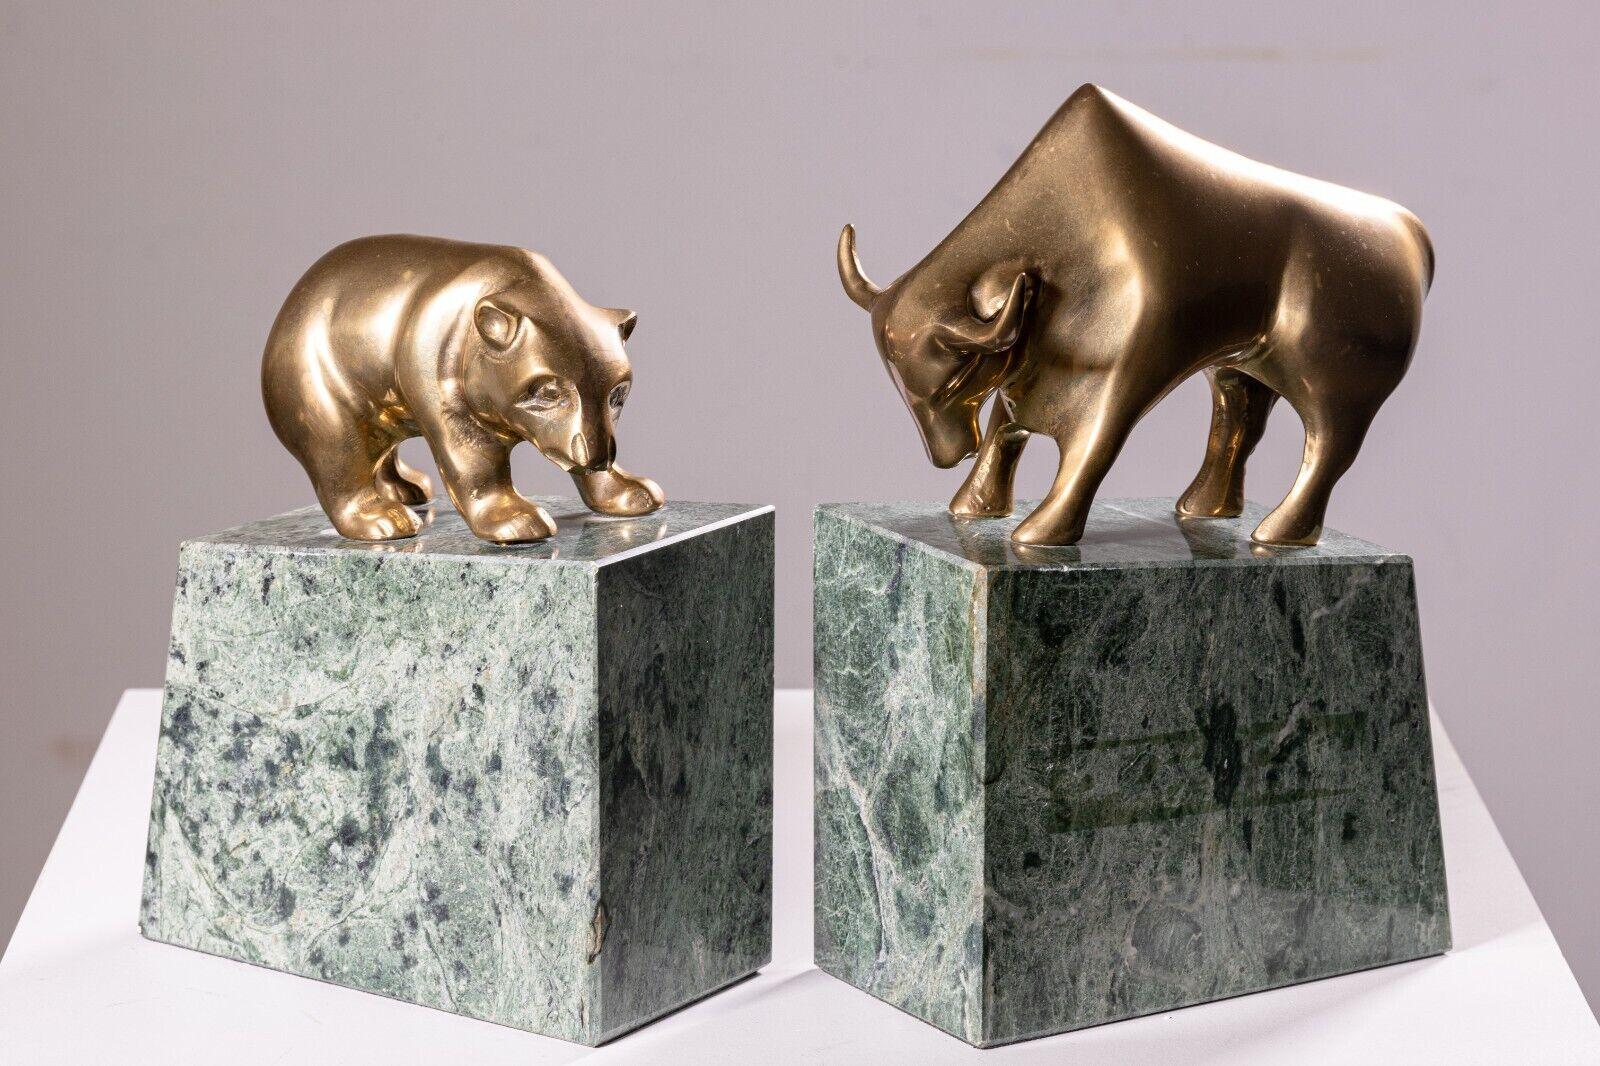 A pair of art deco brass bull and bear bookends. These lovely bookends feature a green marbled stone construction with a felt bottom, and a brass animal sculpture top. Each sculpture, the bull and bear, and very detailed and lively. These pieces are